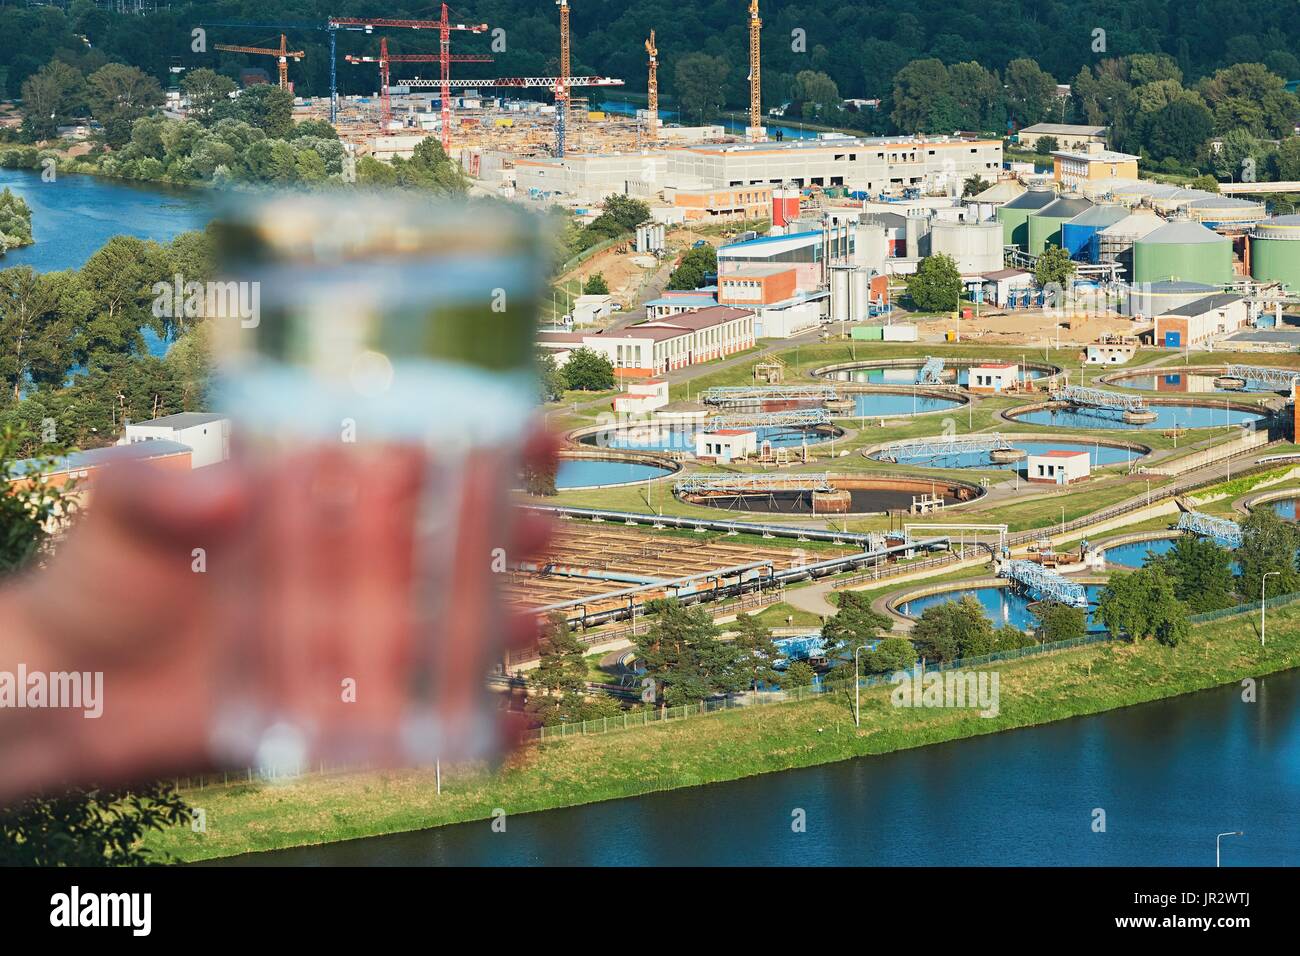 Glass of drinking water and sewage treatment plant - selective focus Stock Photo